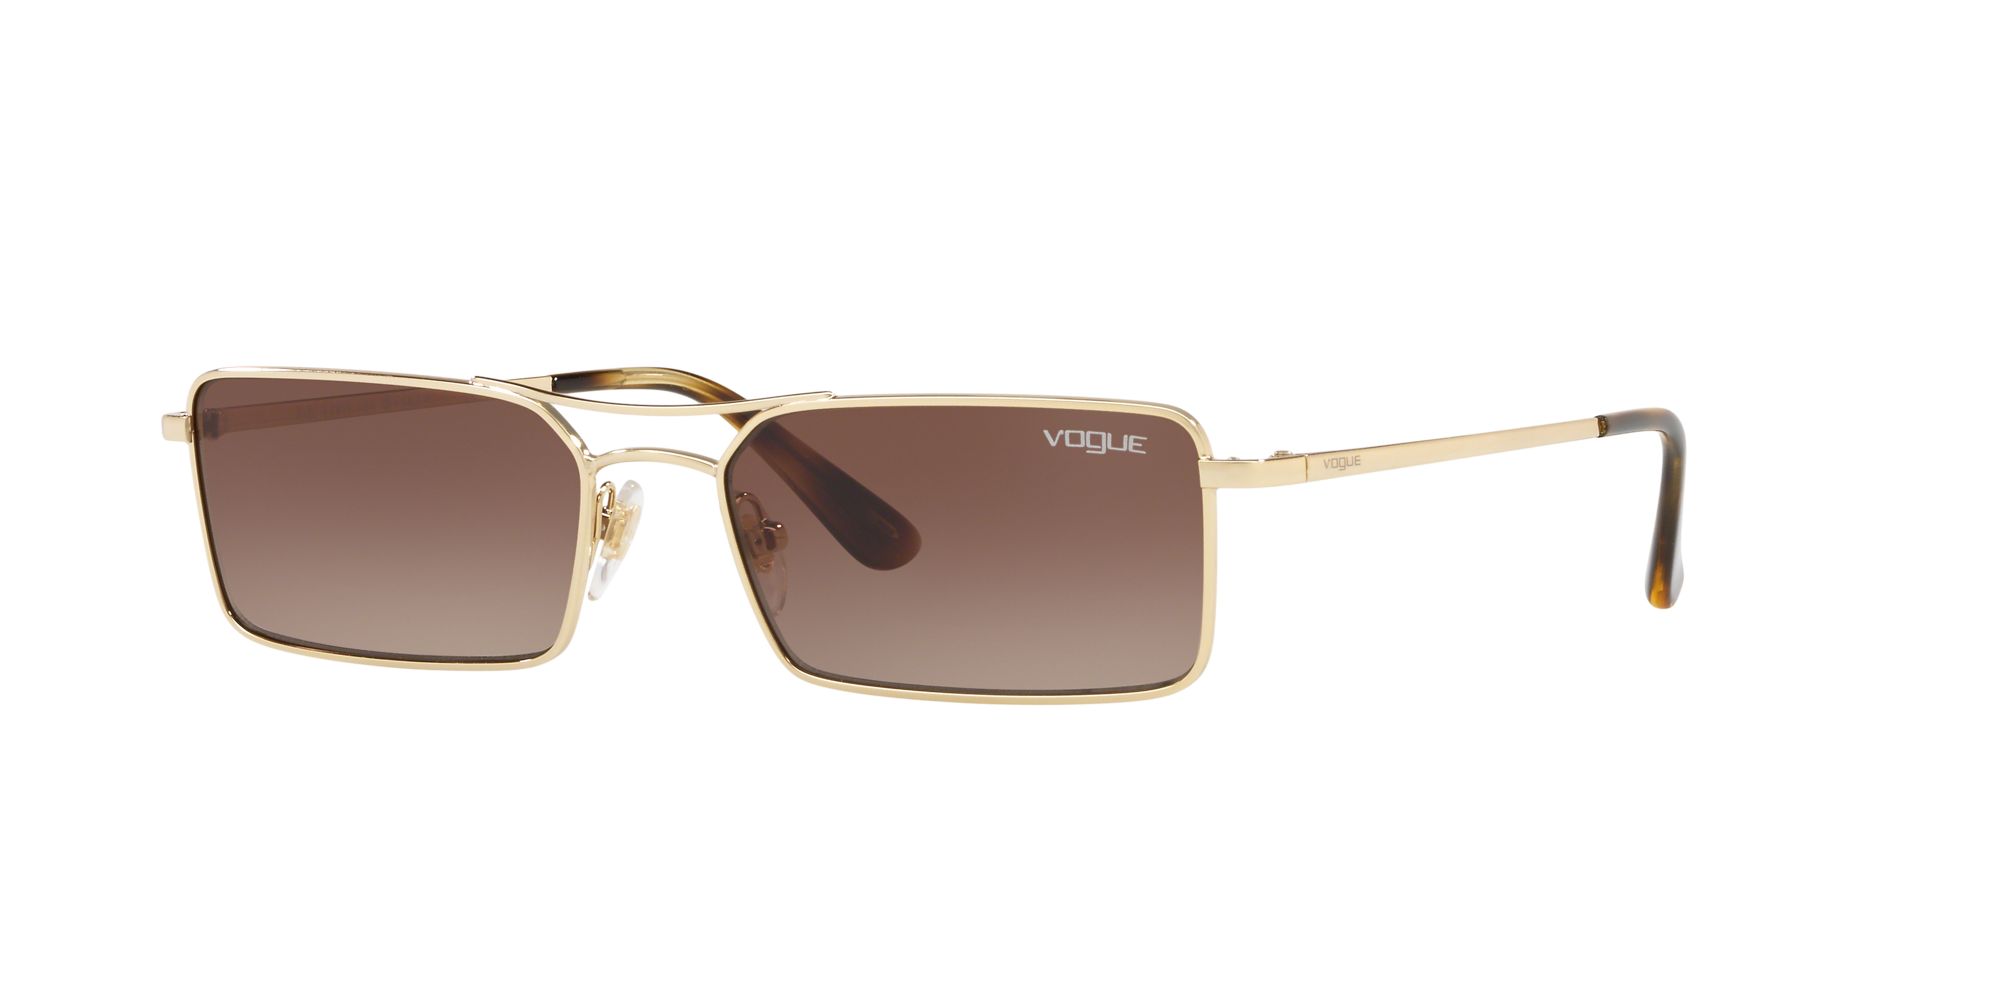 Vogue Sunglasses 0VO4106S - Gold Size 55 | Target Optical